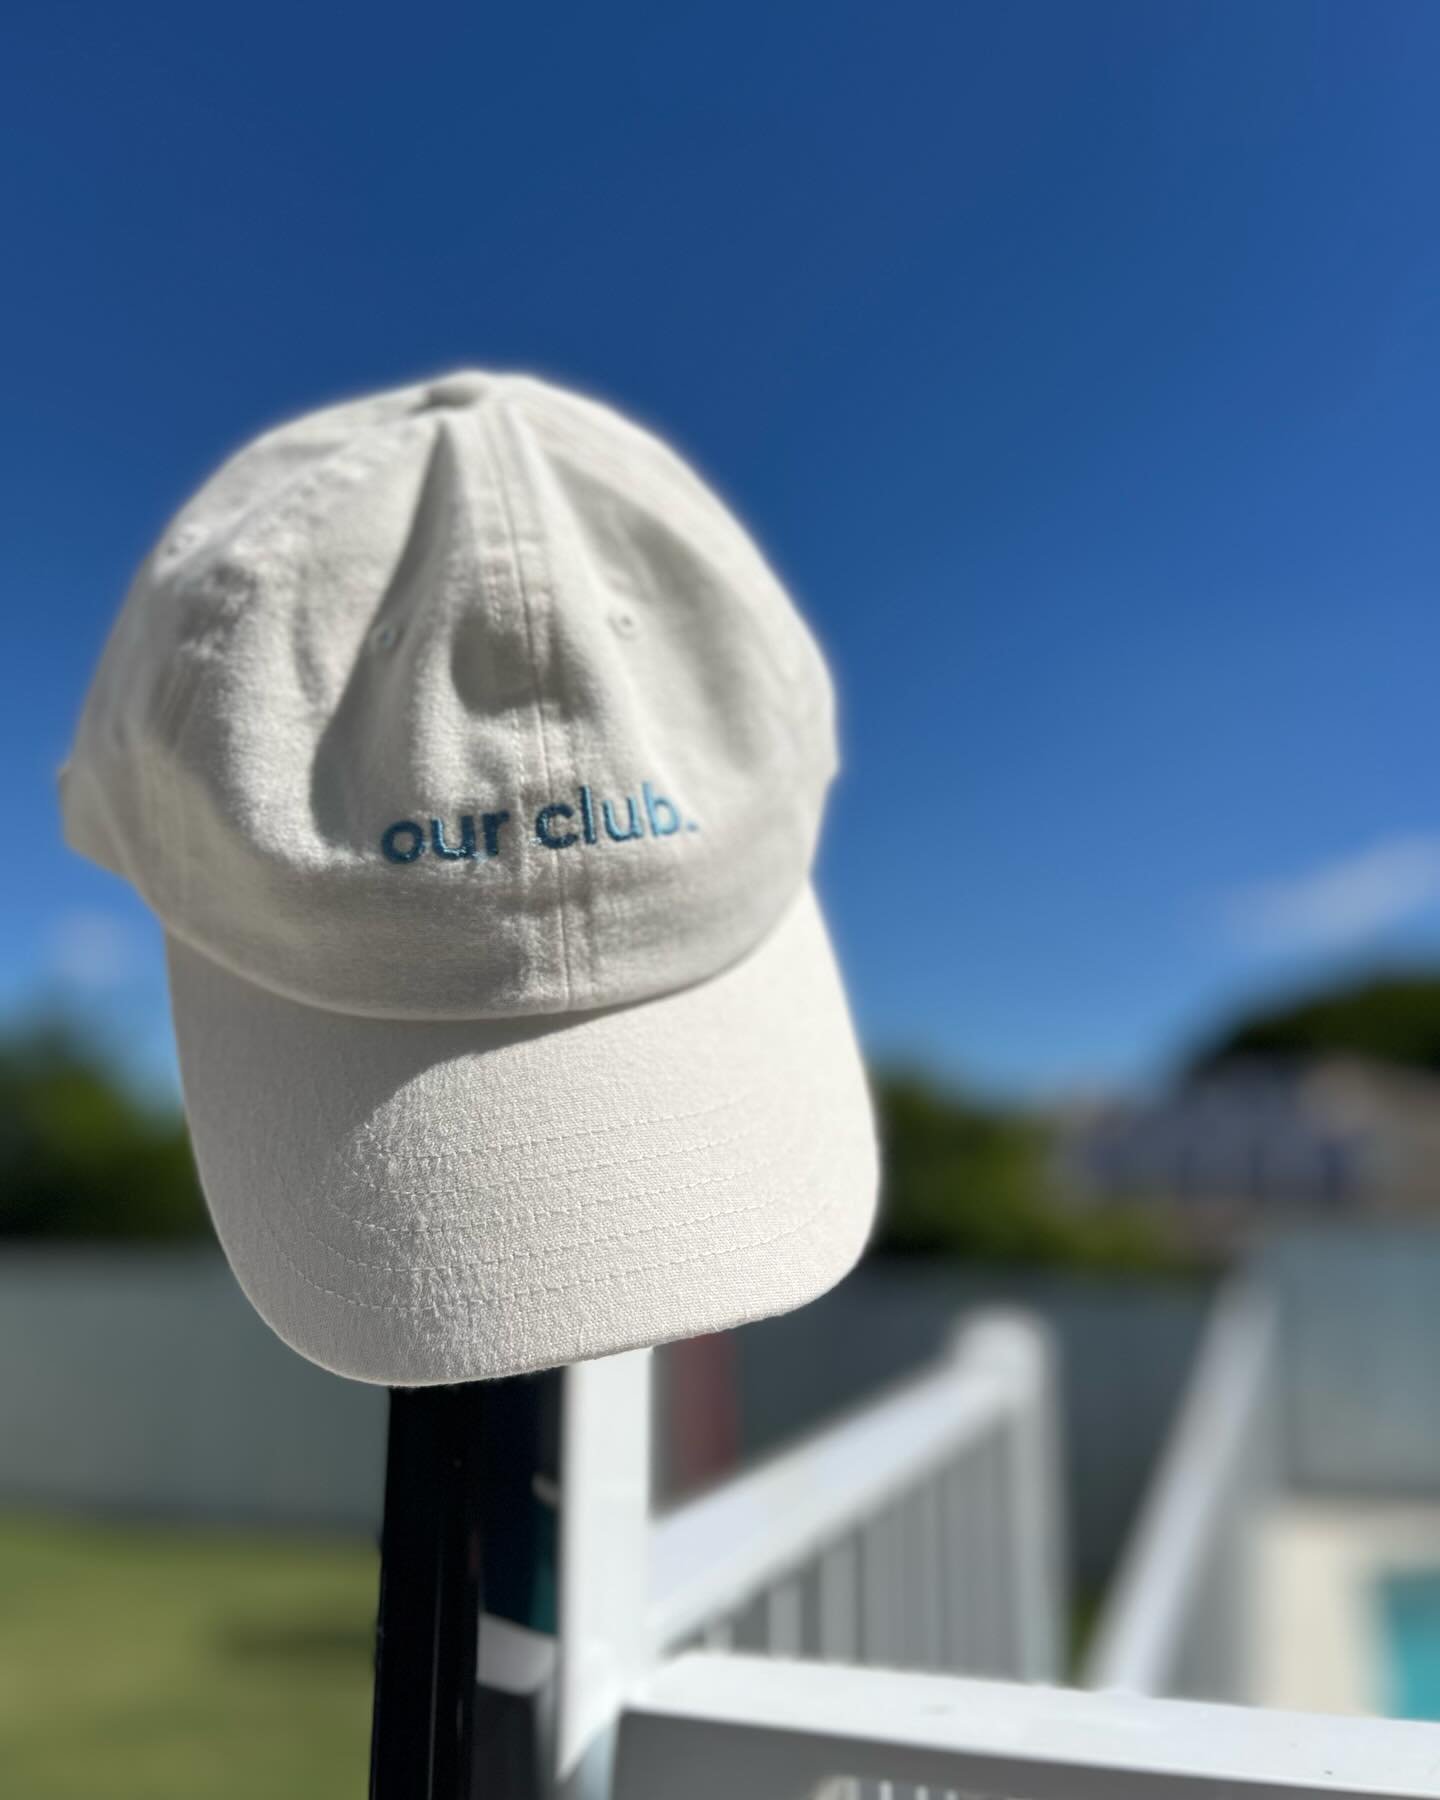 Rain or shine, our classic cap has you covered! ☀️🌧️ Perfect for any season and every adventure. Isn&rsquo;t it time you topped off your look with the best? #AllWeatherWear #OurClubStyle